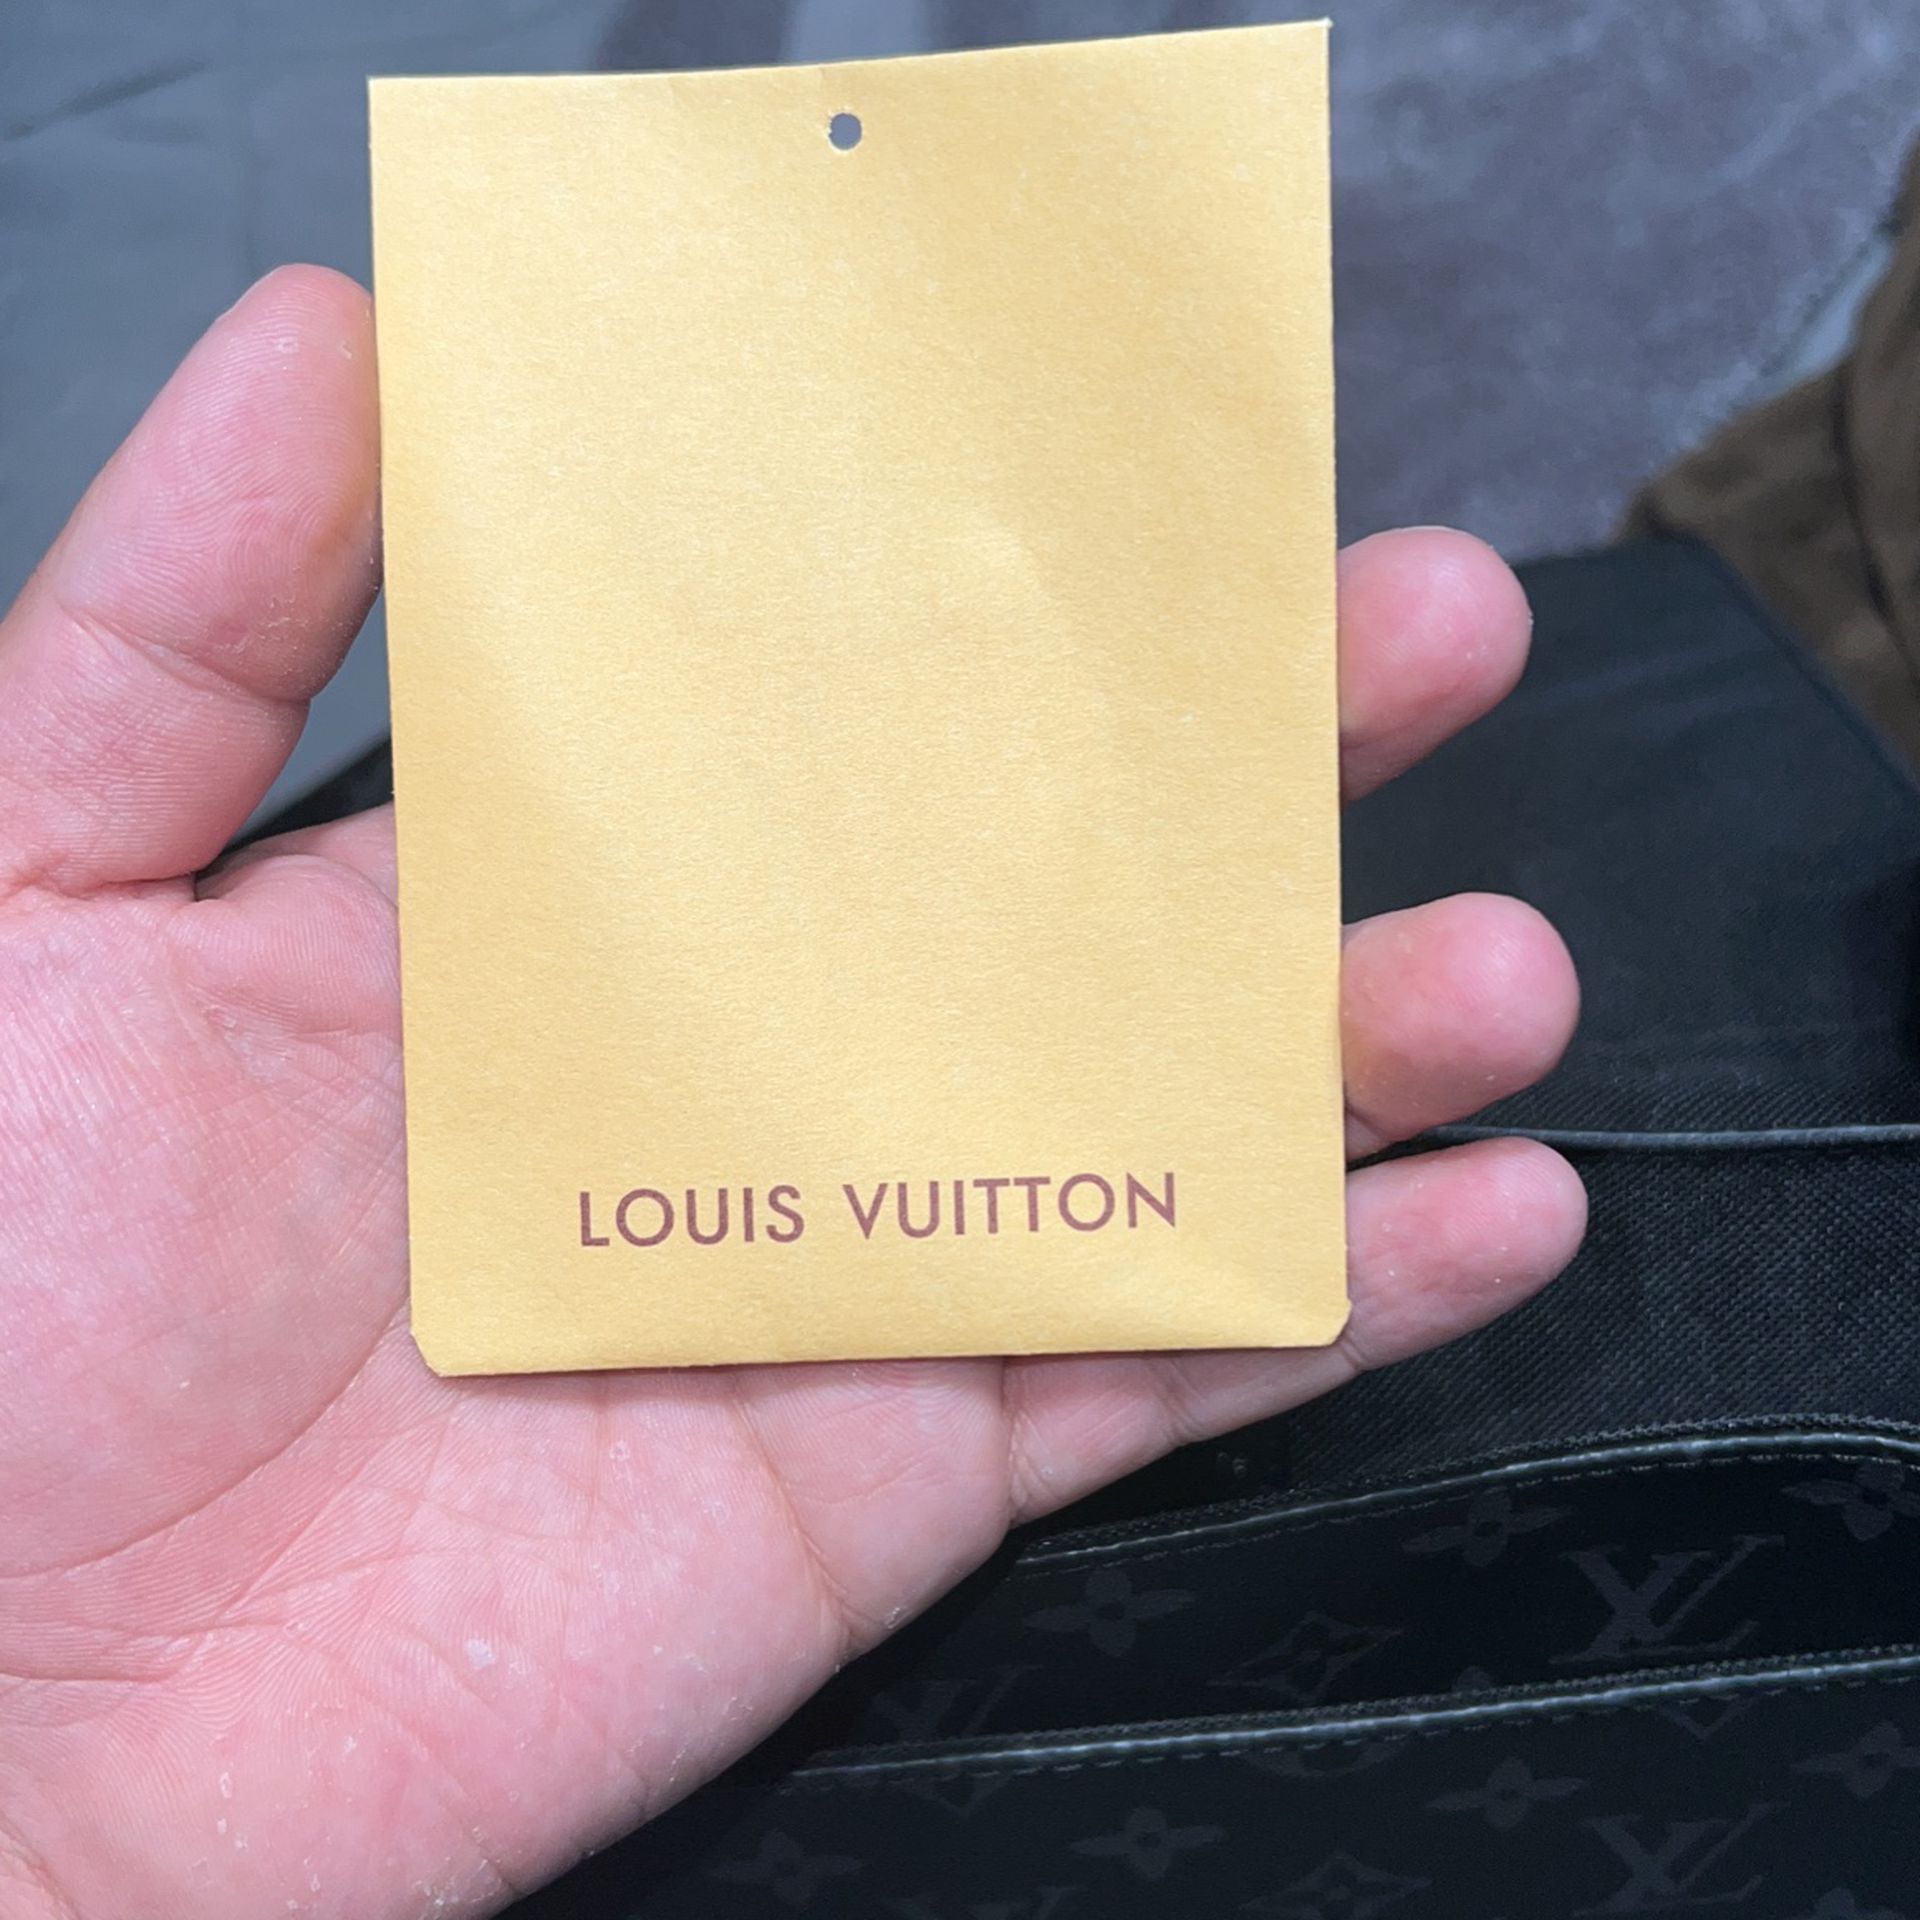 Outdoor Louis Vuitton Ashtray for Sale in Pittsburg, CA - OfferUp